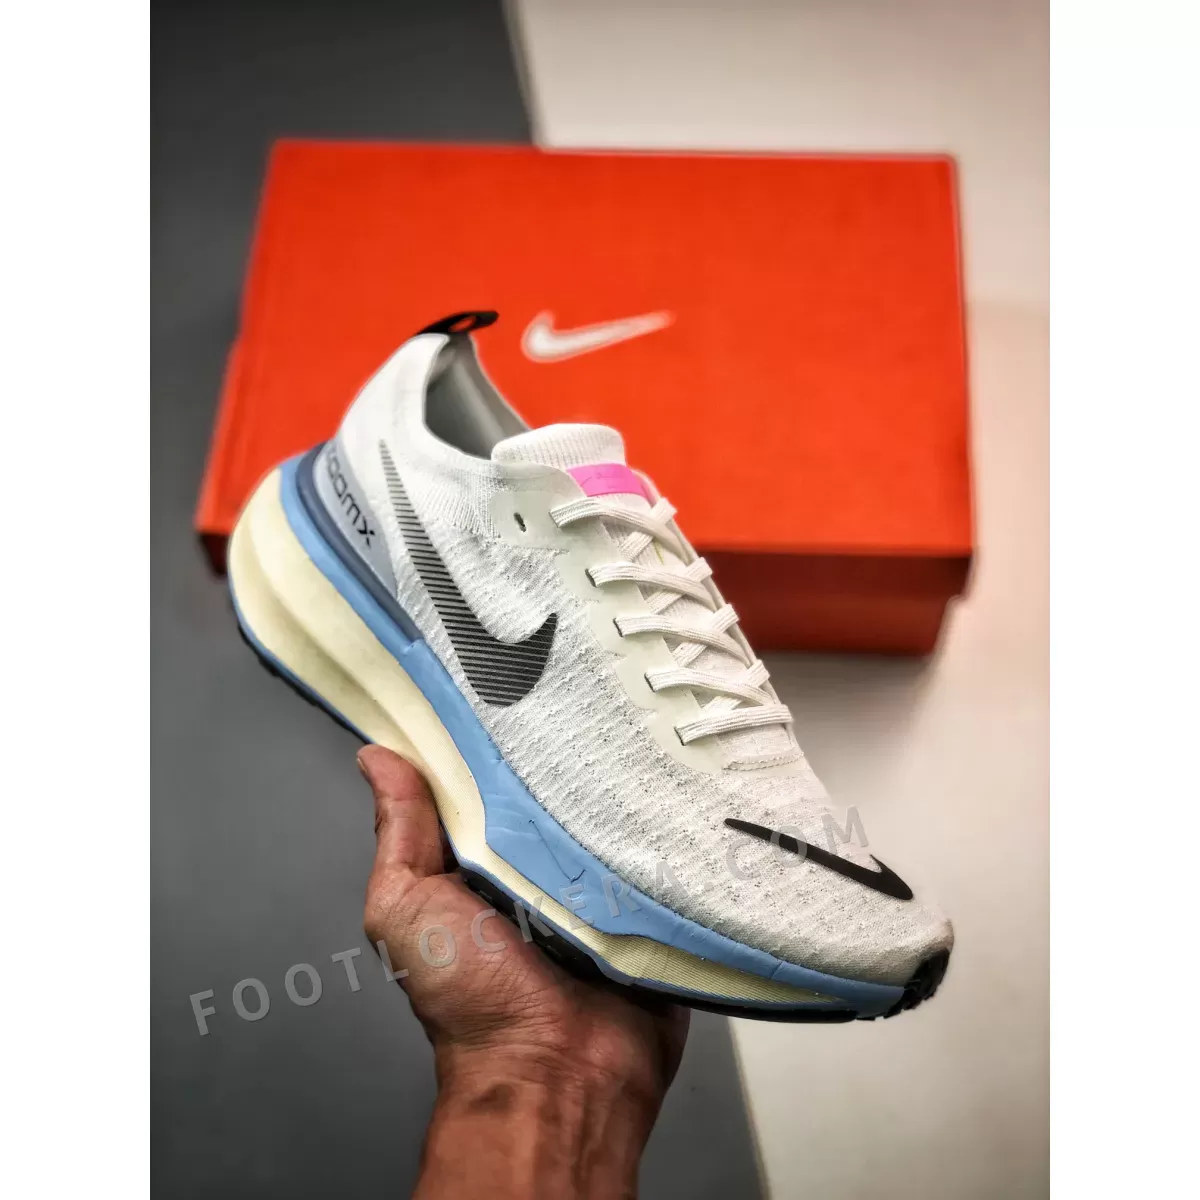 Nike ZoomX Invincible Run Flyknit 3 White/Black-Grey-Cobalt Bliss-Pink Spell nike invincible 3 white